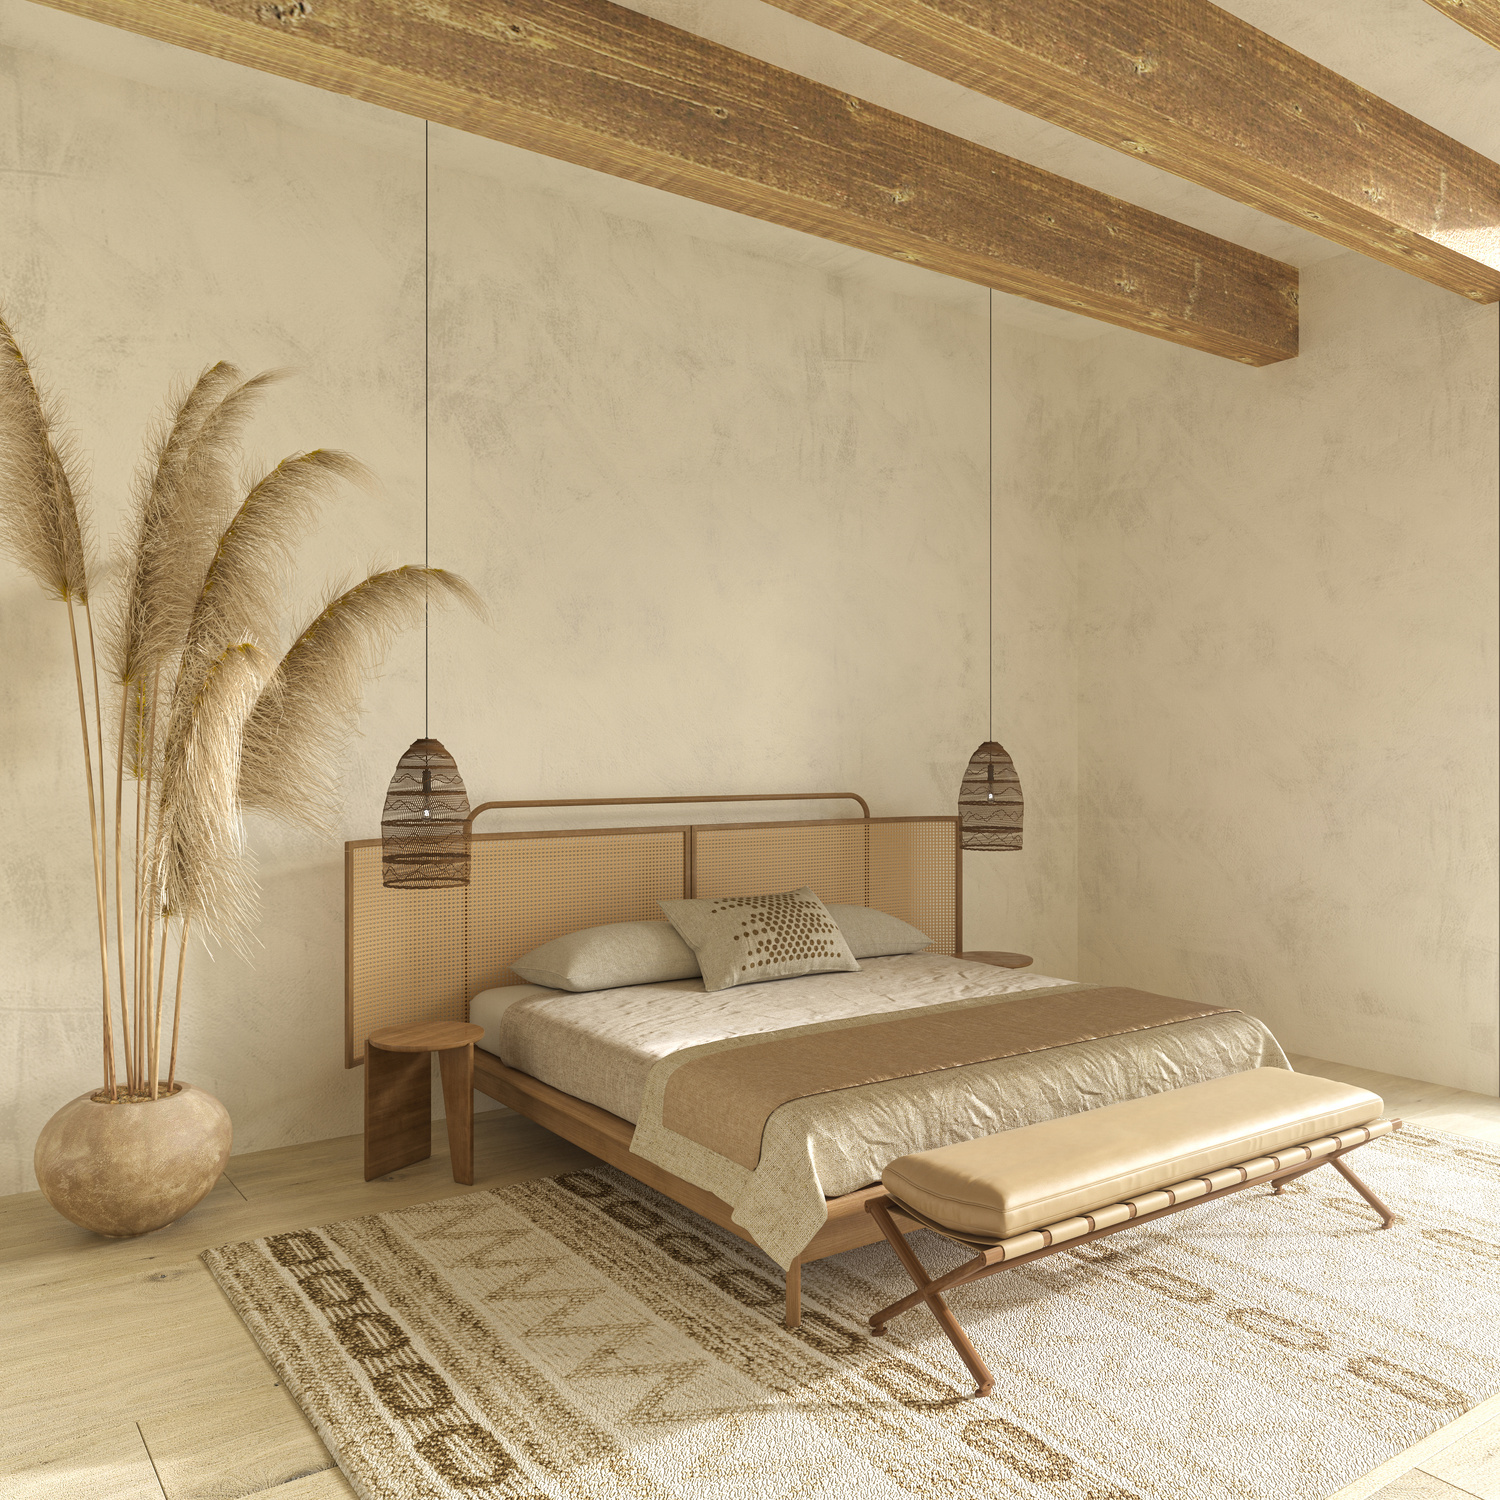 Japandi Style in Farmhouse Interior Bedroom. Beige Apartment with Natural Wooden Furniture and Dry Plants. Wall Mock up. 3D Render Illustration.